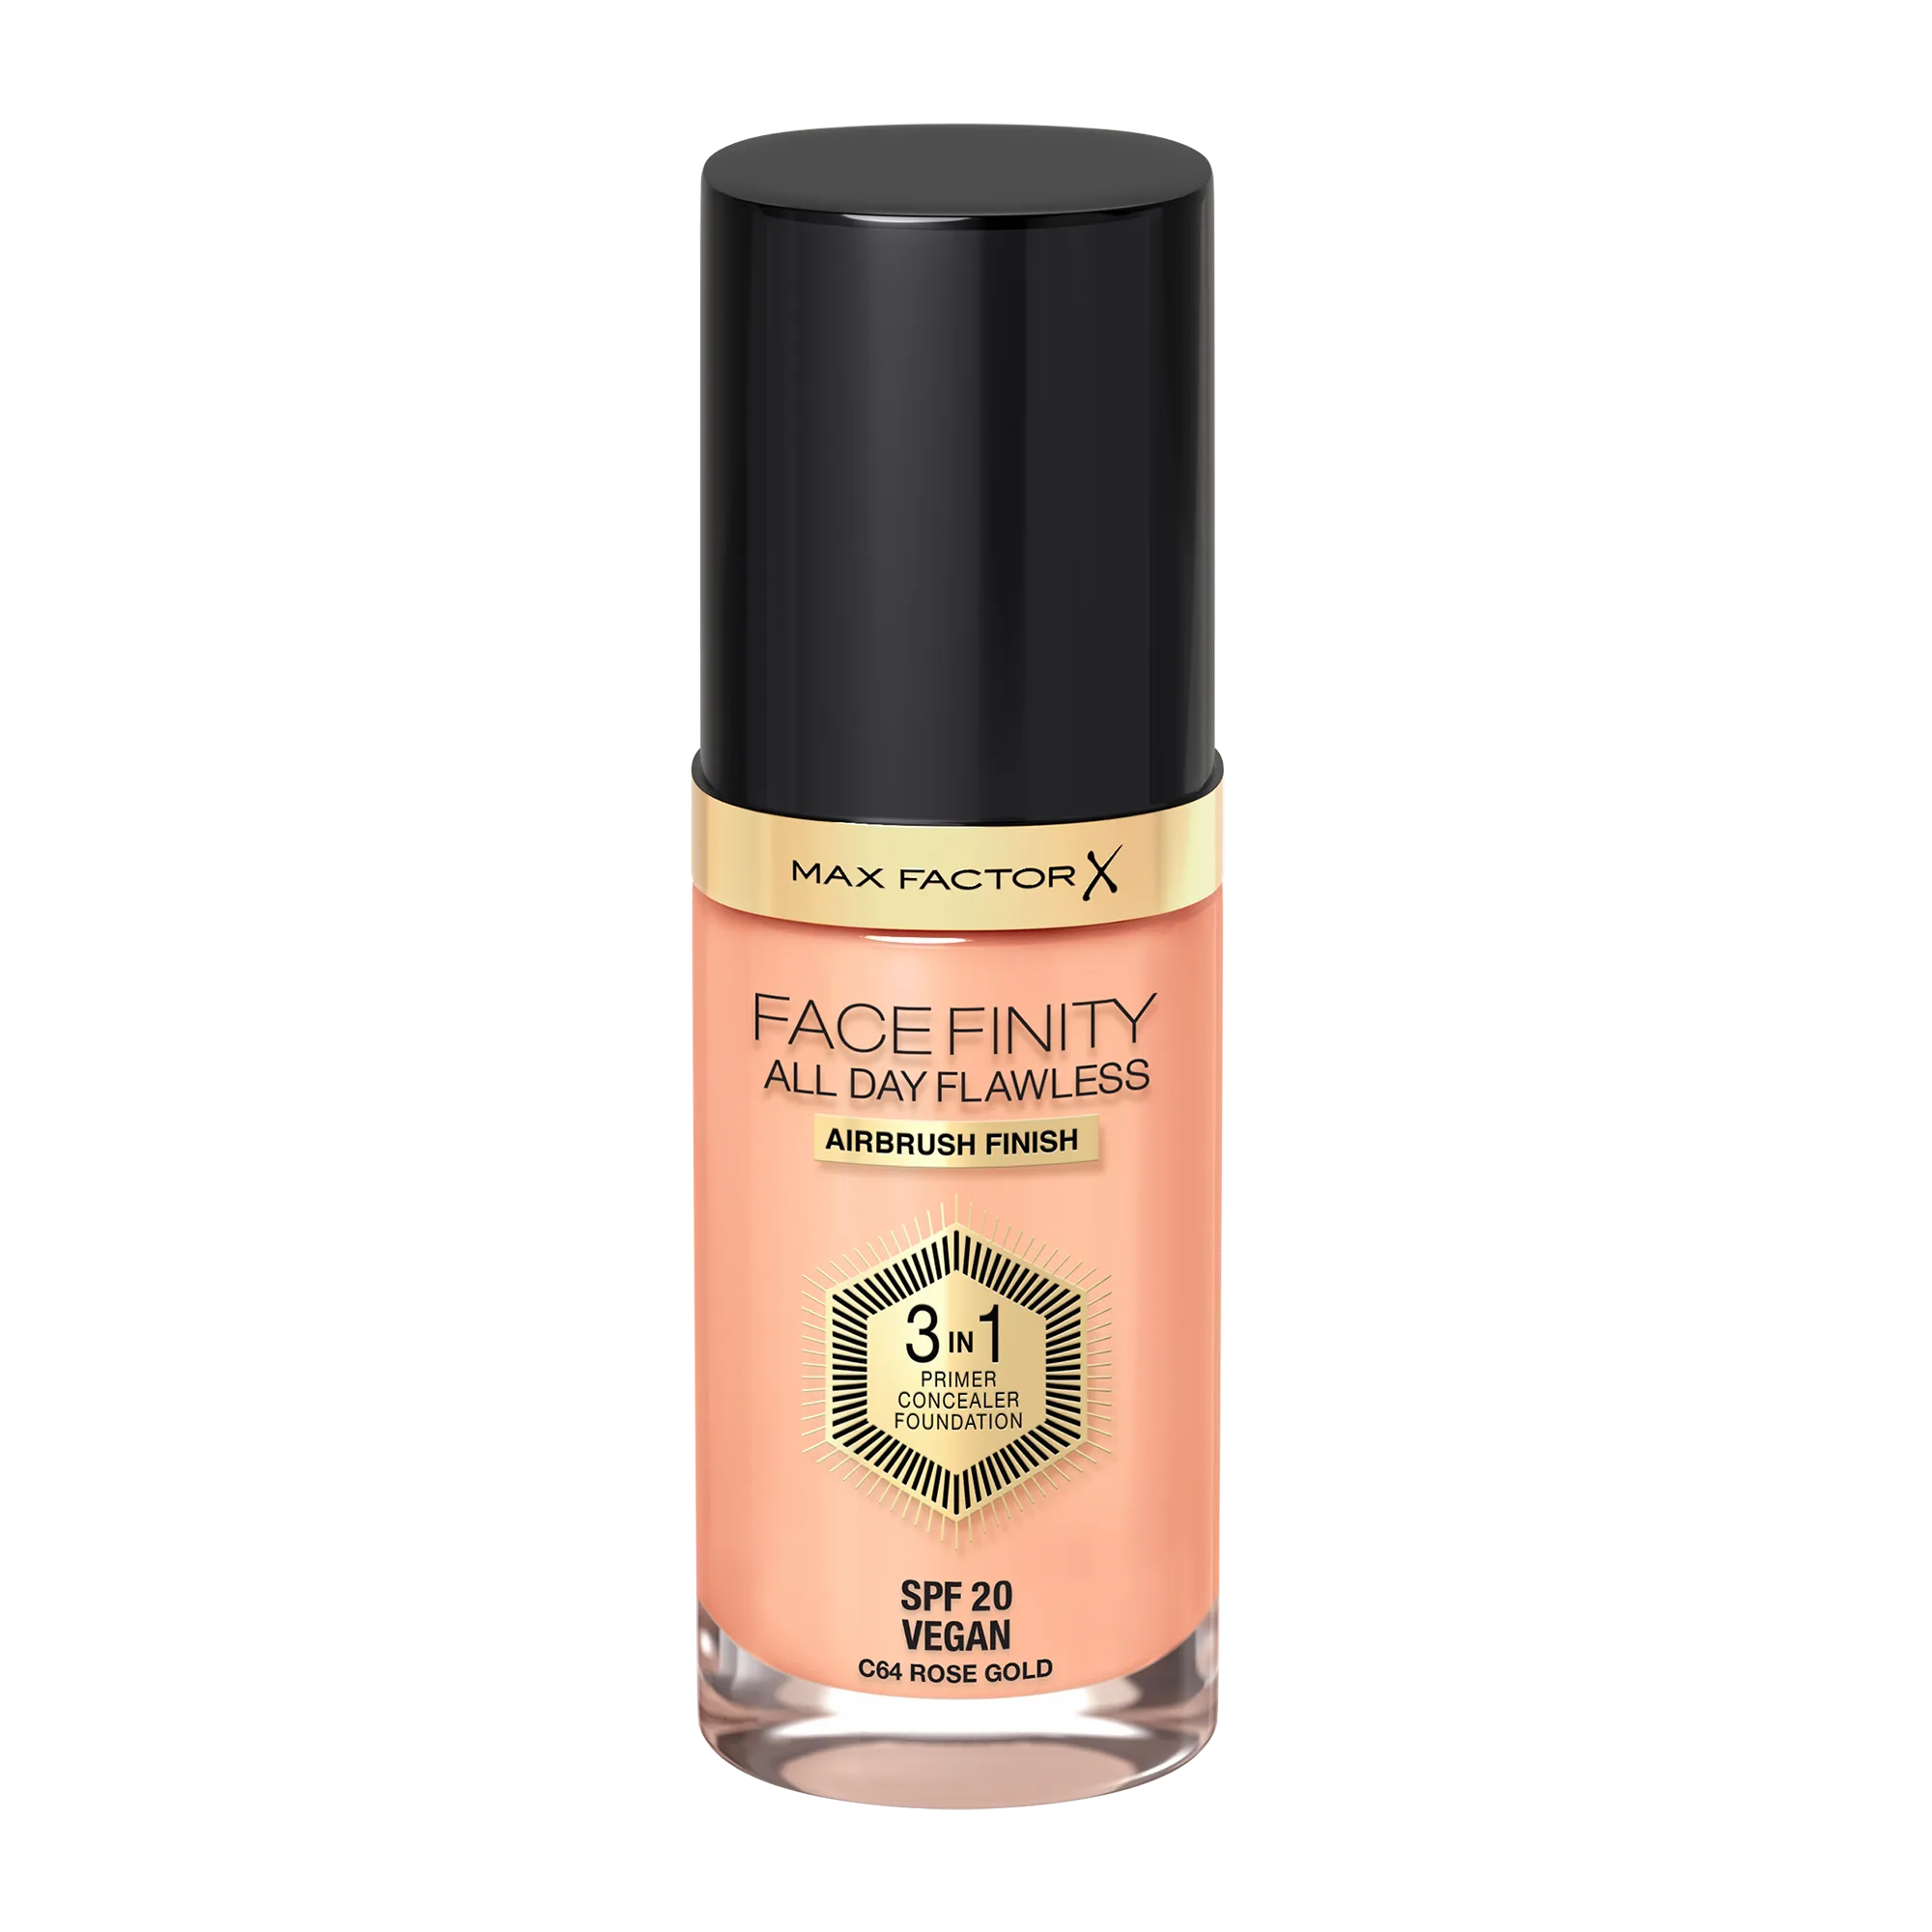 Max Factor Facefinity All Day Flawless 3in1 Foundation SPF20 Podkład do twarzy 64 Rose Gold, 30 ml